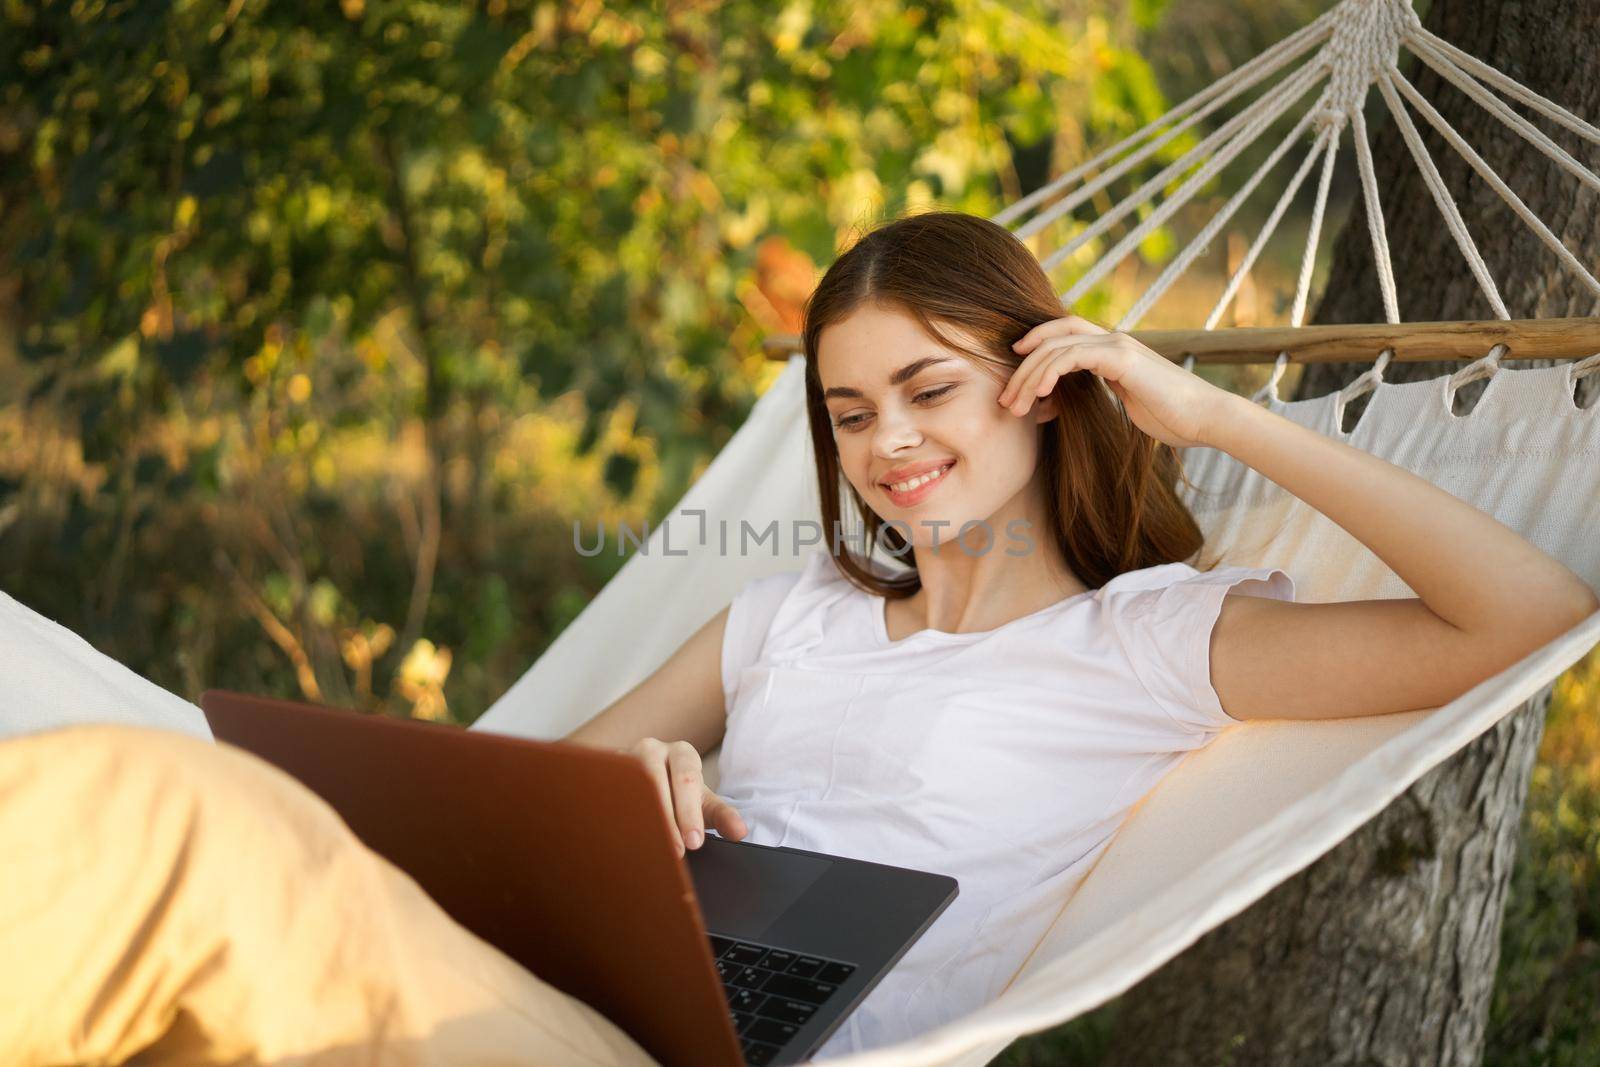 women outdoors lies in a hammock with a laptop freelance internet by Vichizh